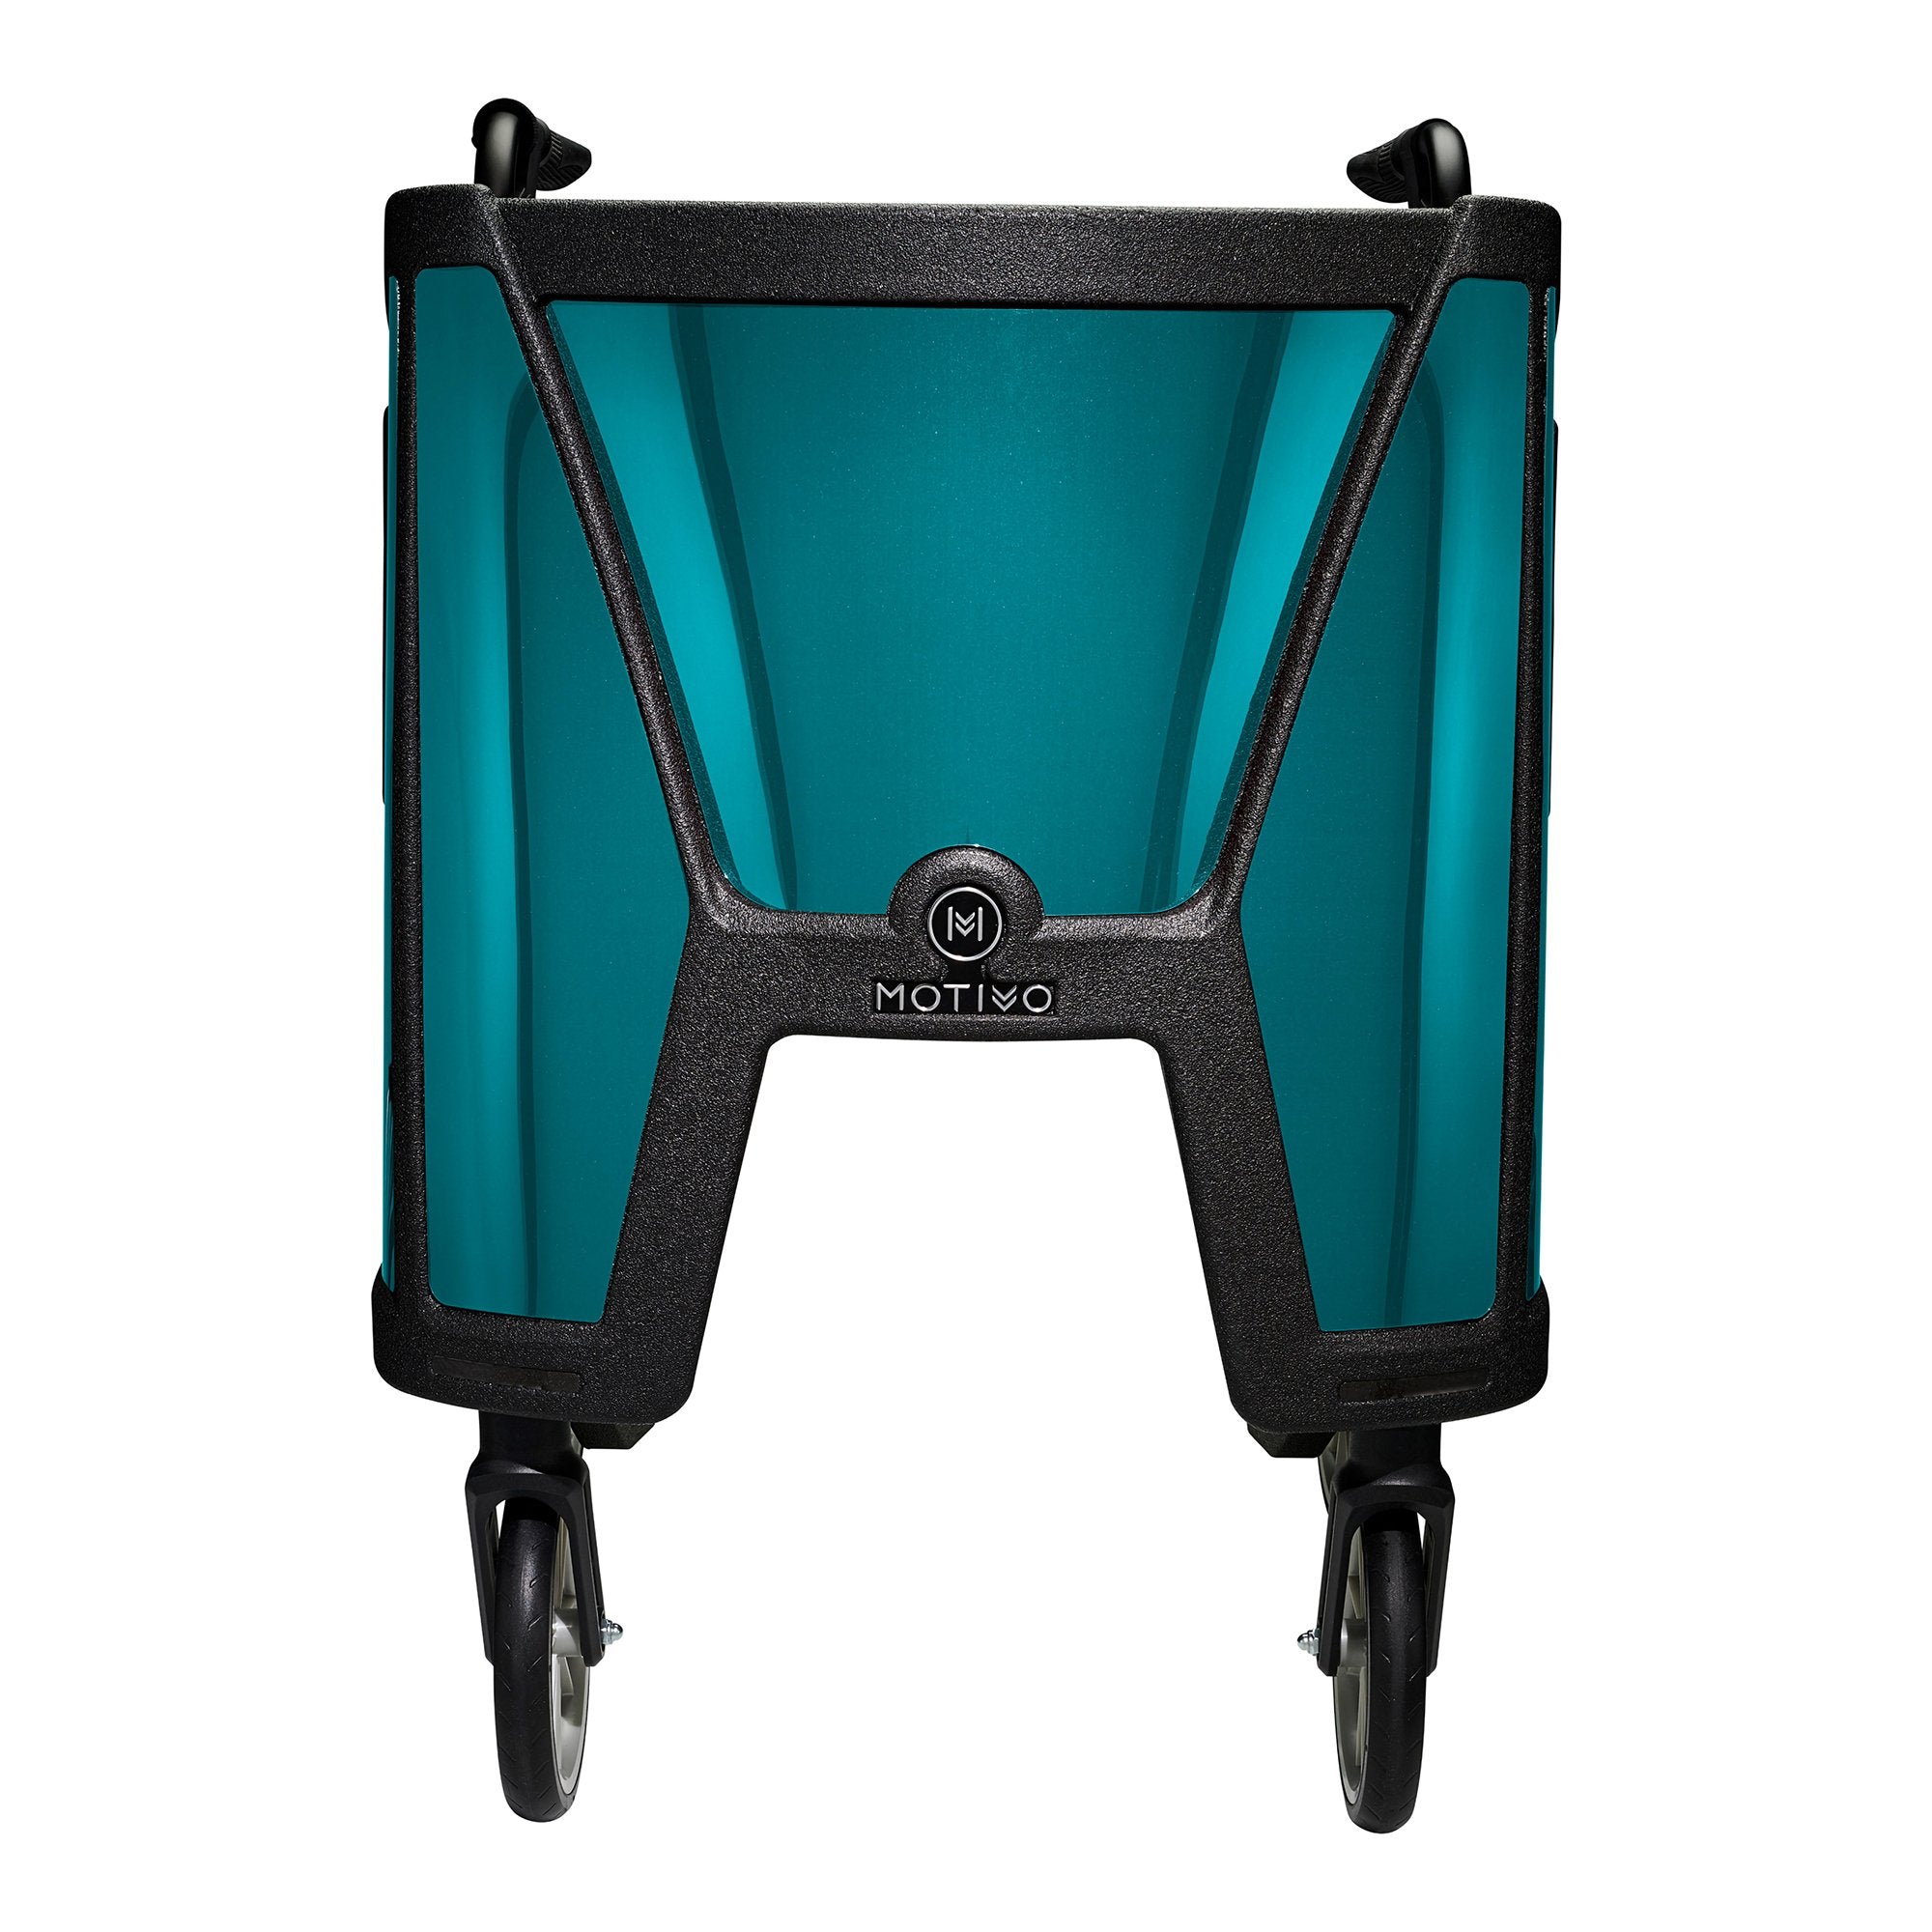 Tour Four-Wheel Rollator, 31 to 37 Inch Handle Height, Ocean Teal